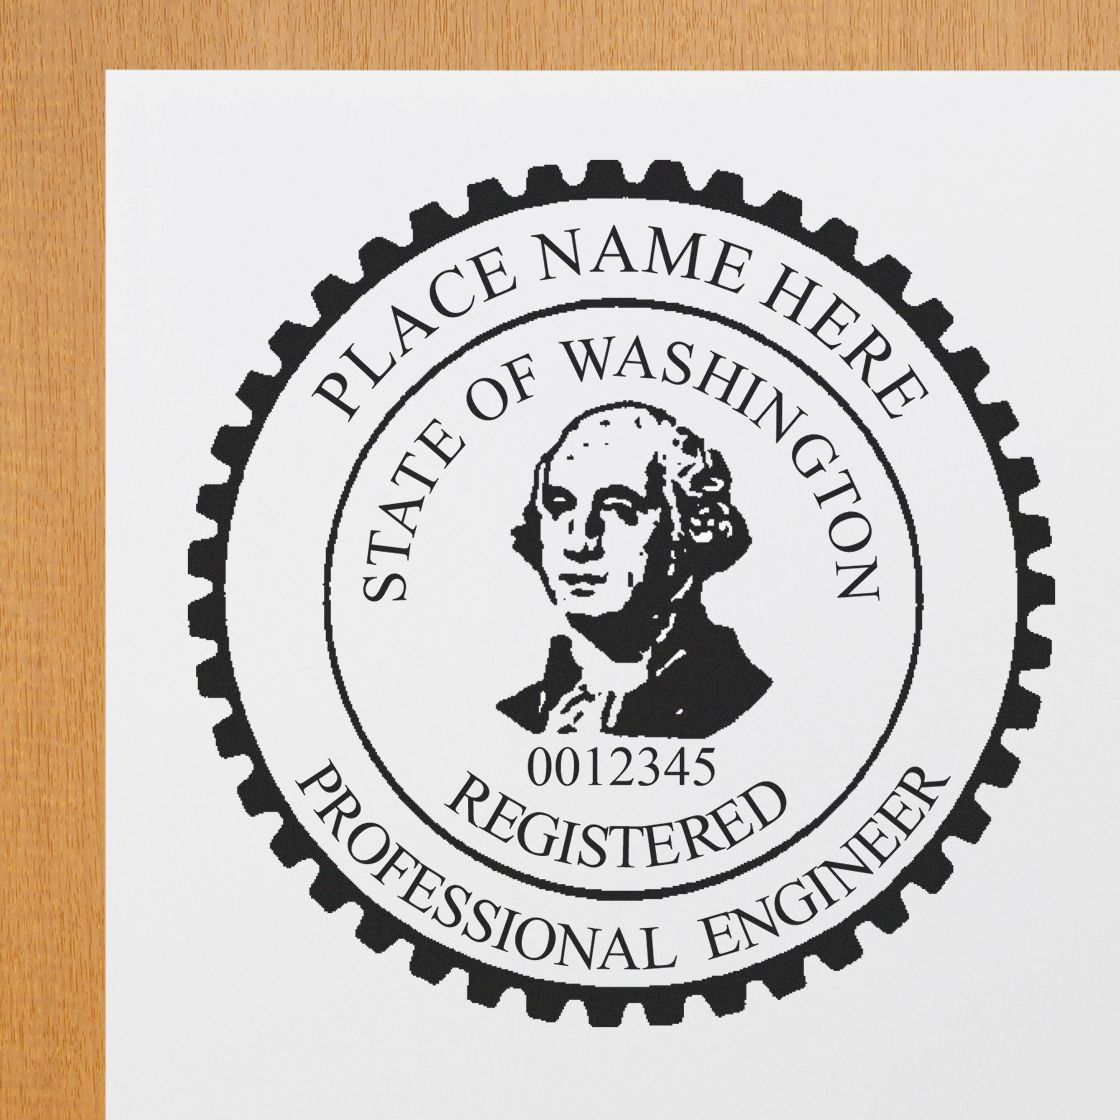 A lifestyle photo showing a stamped image of the Washington Professional Engineer Seal Stamp on a piece of paper